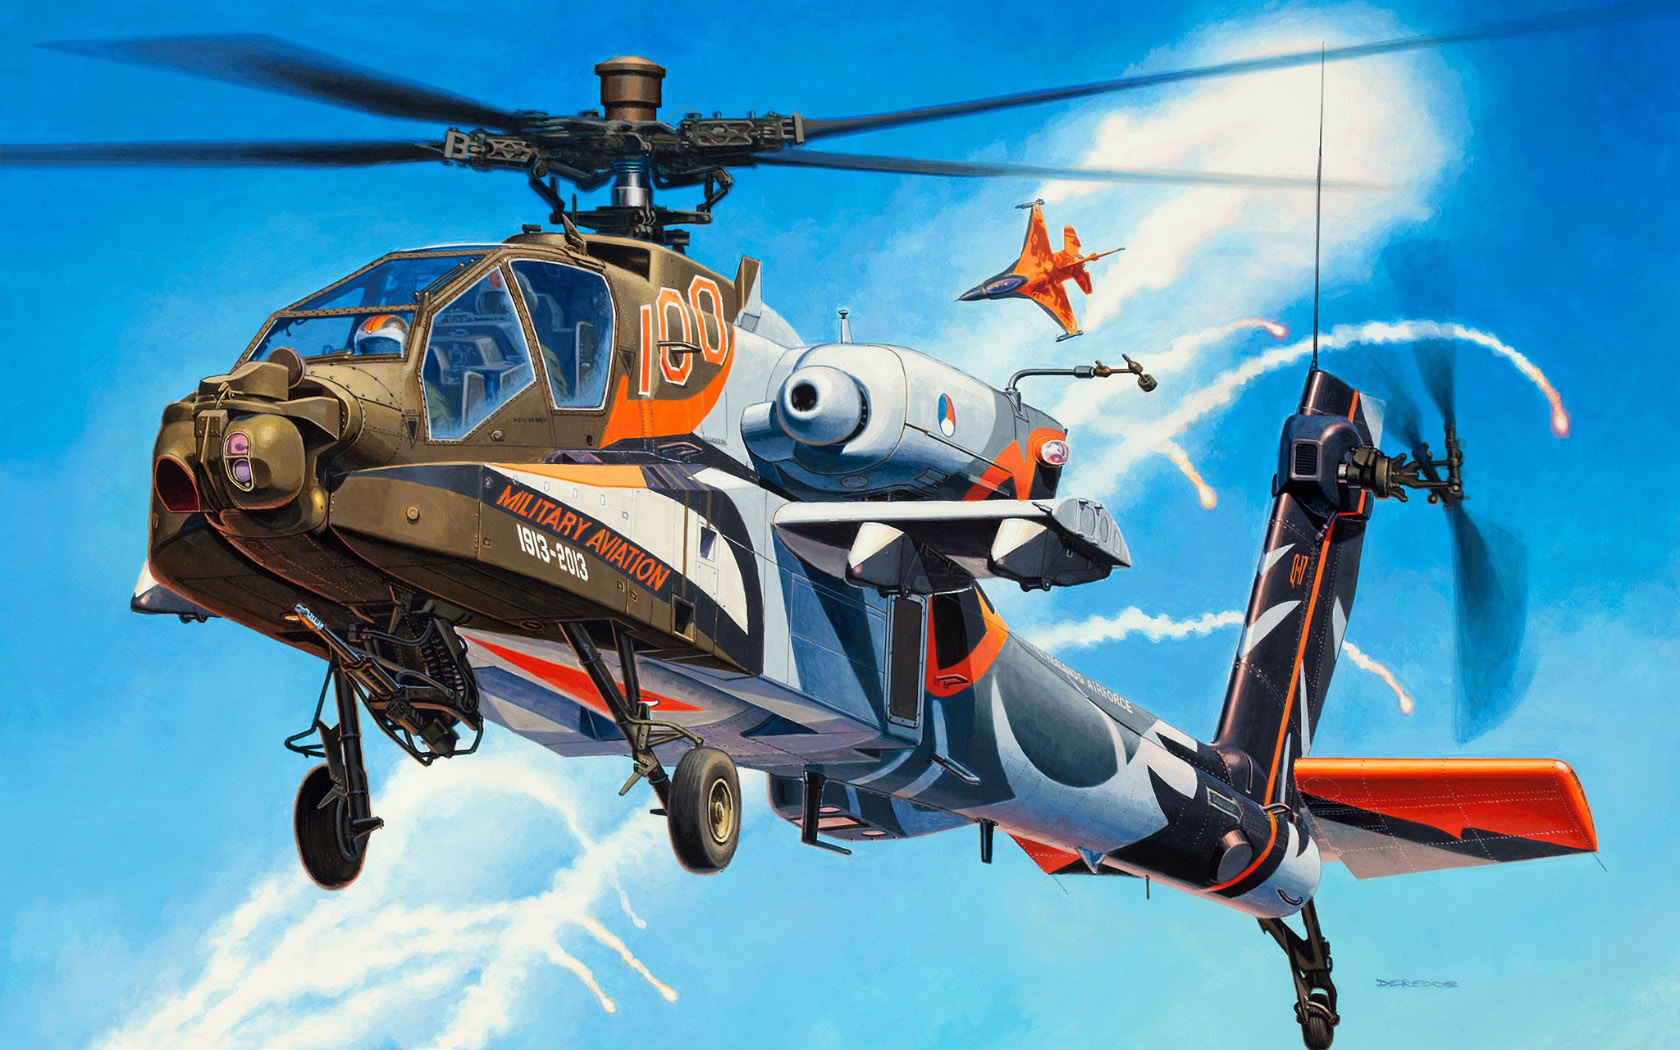 General 1680x1050 aircraft military sky flying clouds helicopters artwork Royal Netherlands Air Force Boeing AH-64 Apache General Dynamics F-16 Fighting Falcon 2013 (Year) Boxart attack helicopters jet fighter anniversary birthday Andrzej Deredos aerobatic team